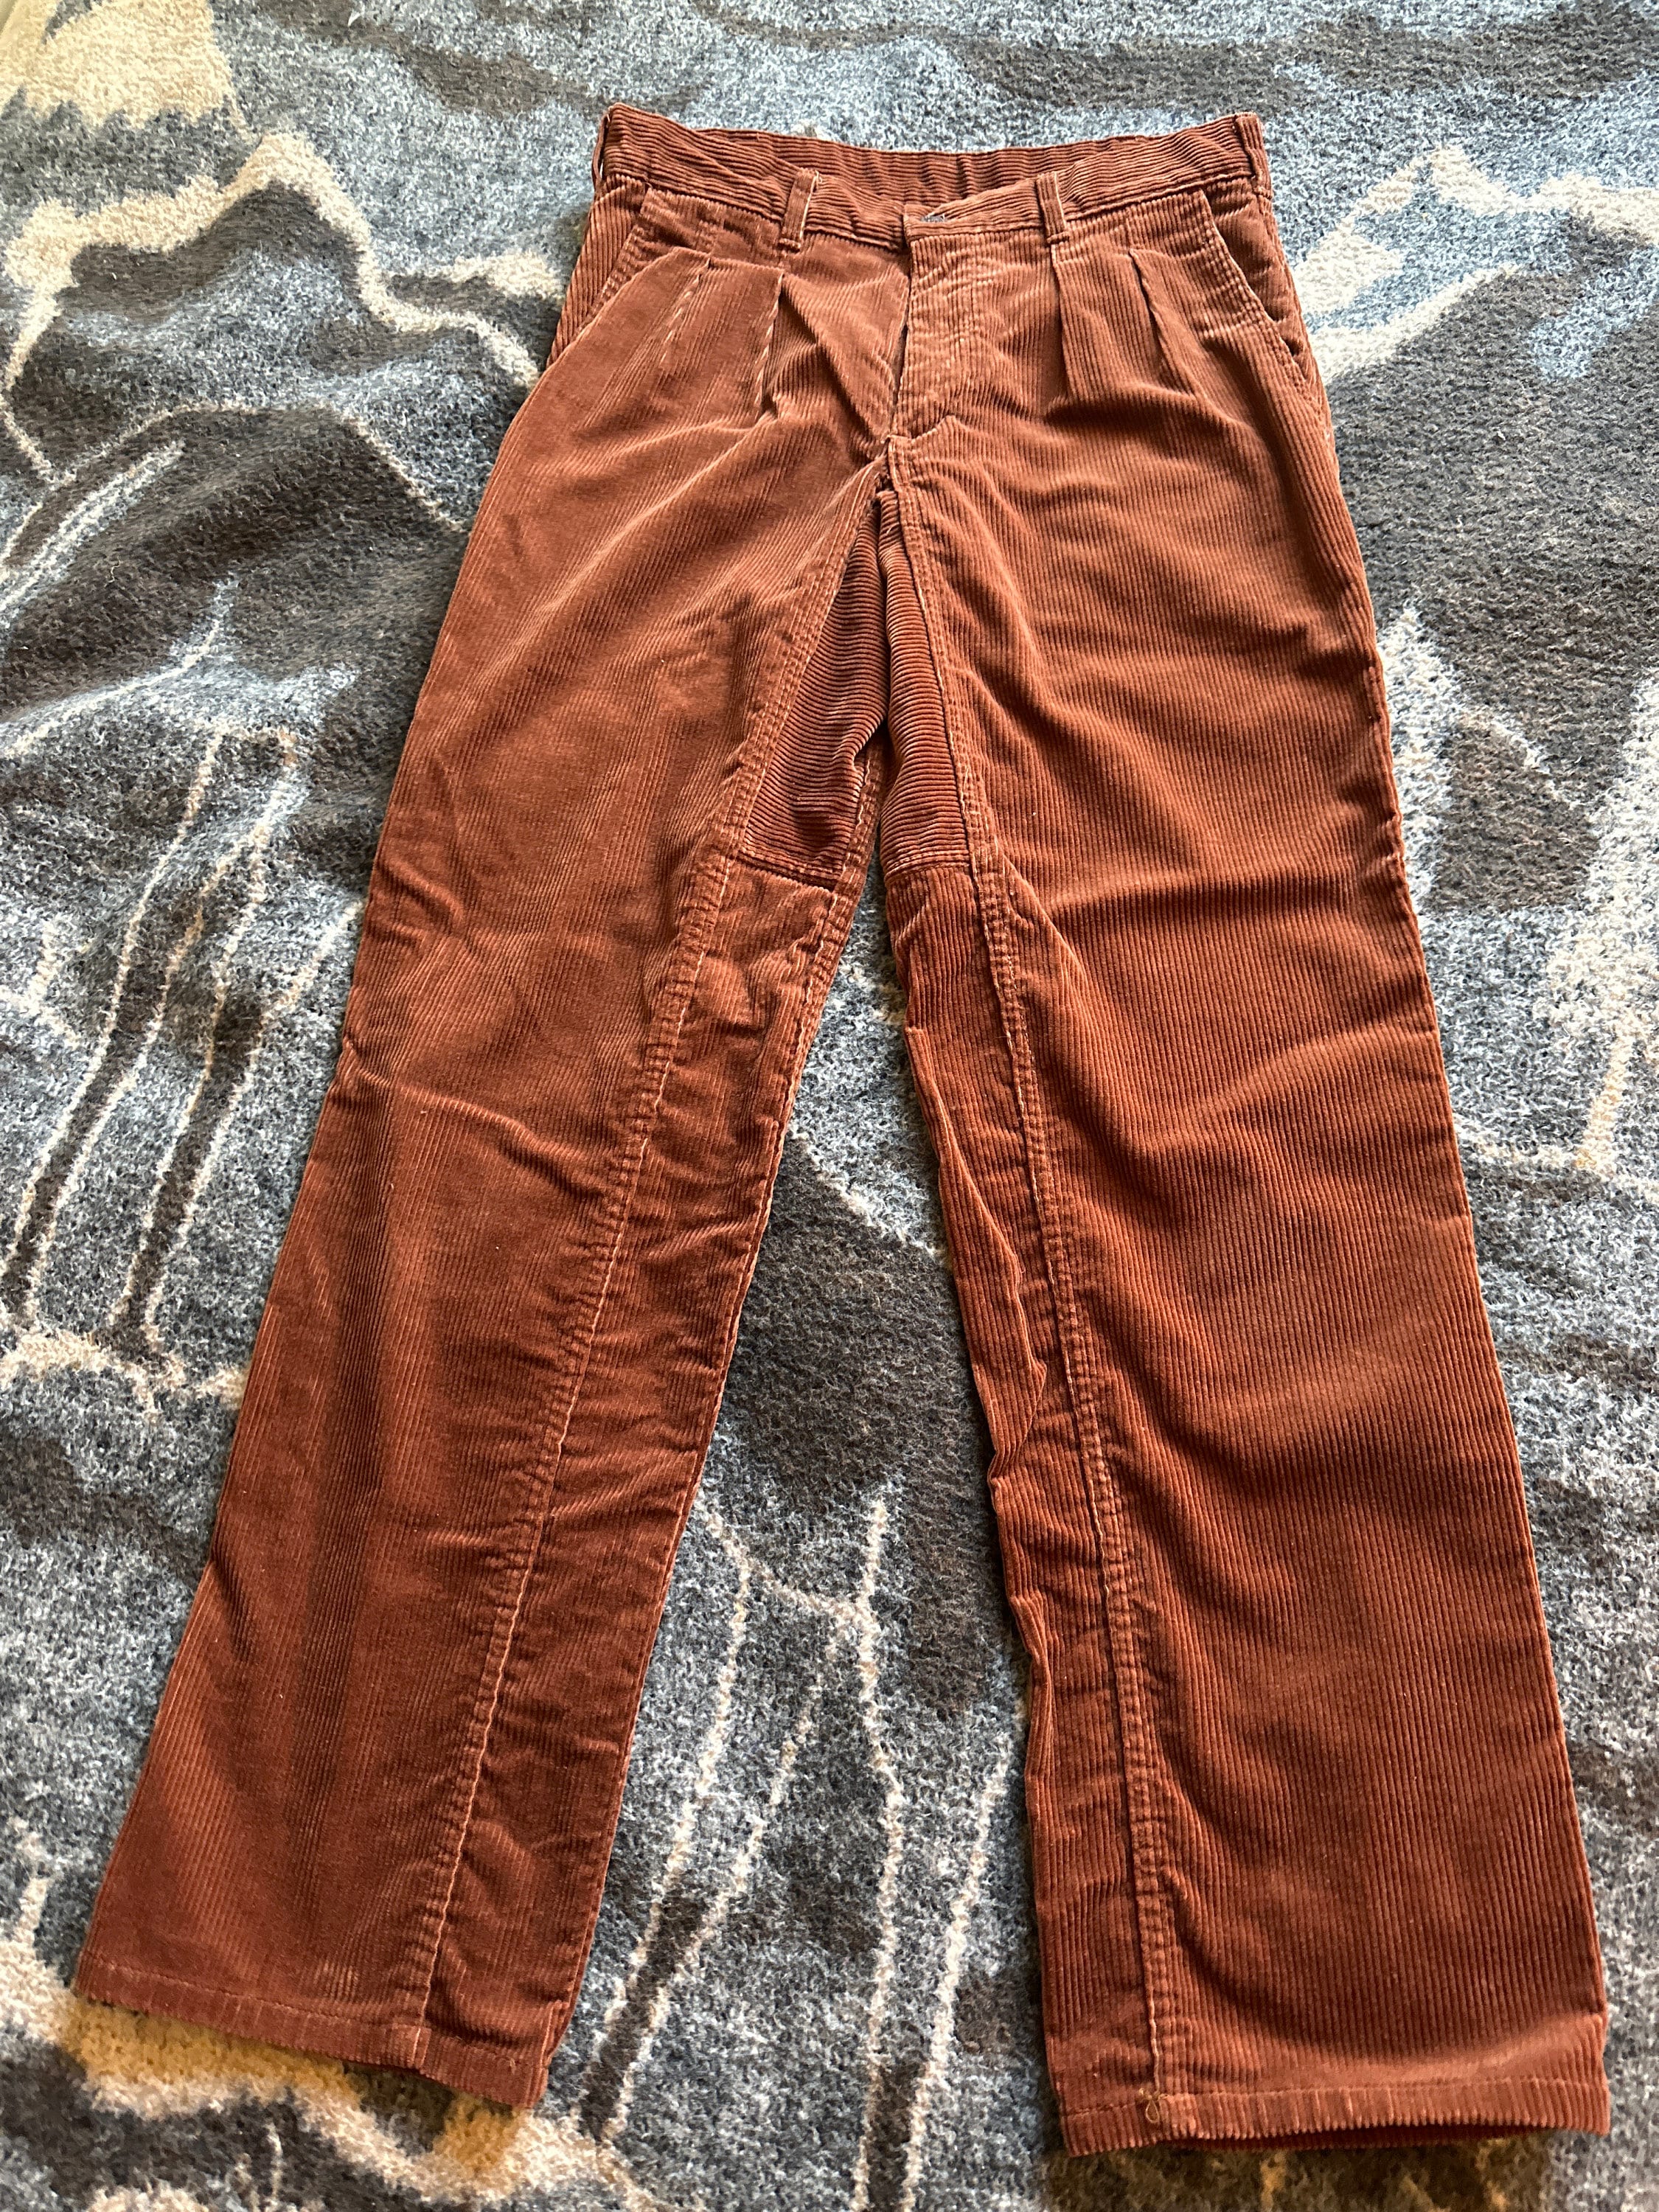 Corduroy Trousers for Men  Cord Trousers  MR PORTER